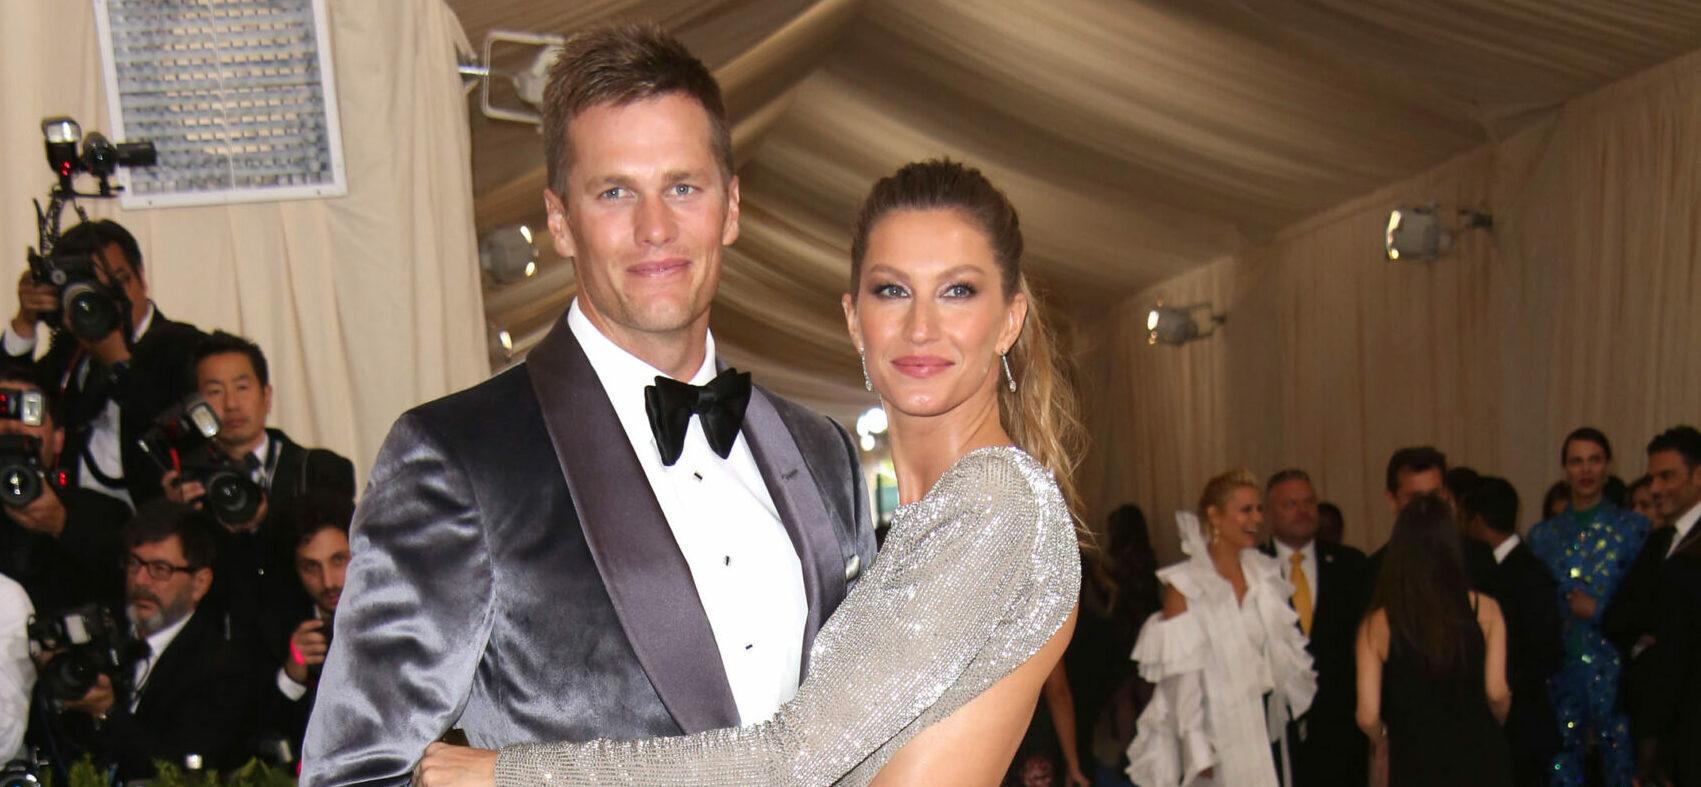 Gisele Bündchen Clears Up ‘Hurtful’ Rumors About Tom Brady And Their Divorce: ‘We Are A Team’